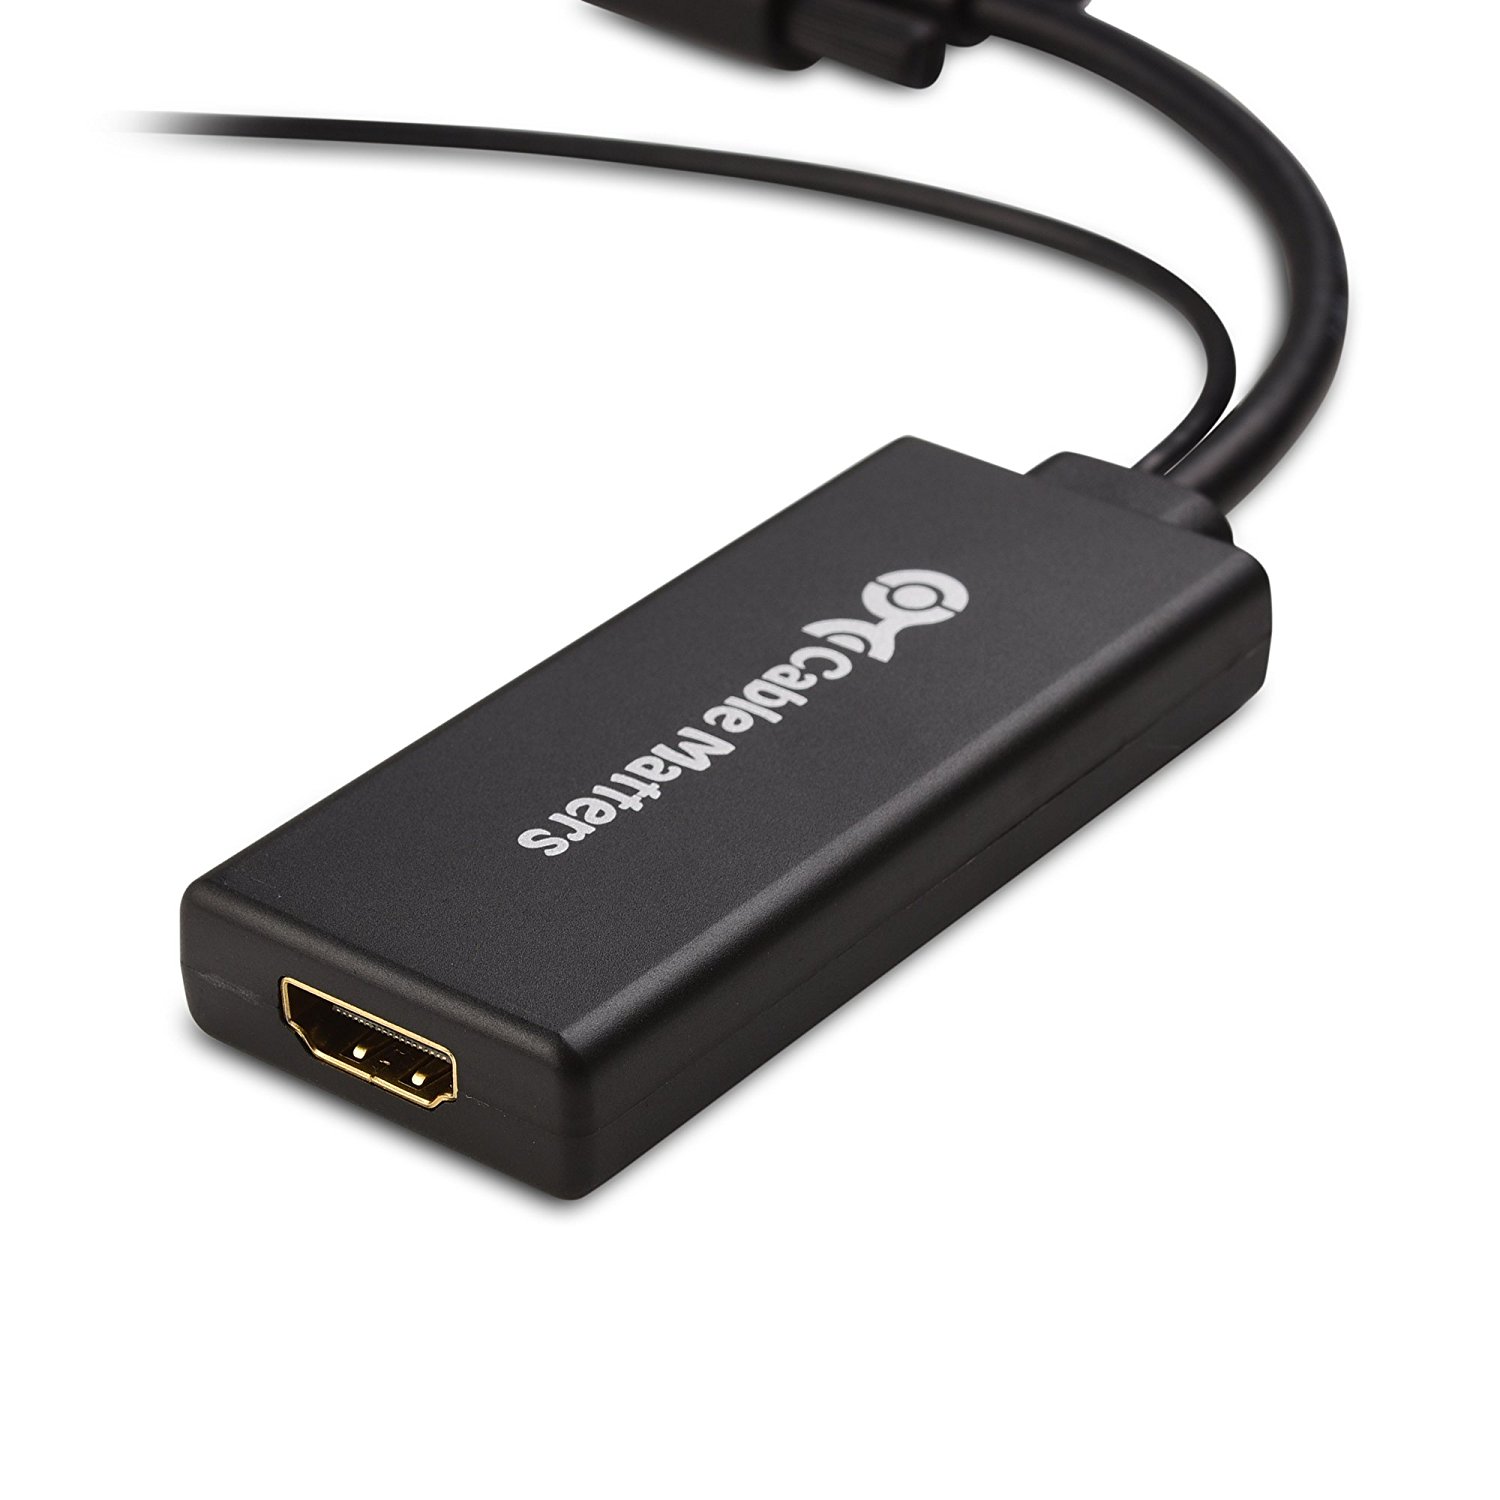 Cable Matters VGA to HDMI Converter (VGA to HDMI Adapter) with Audio Support - image 4 of 4